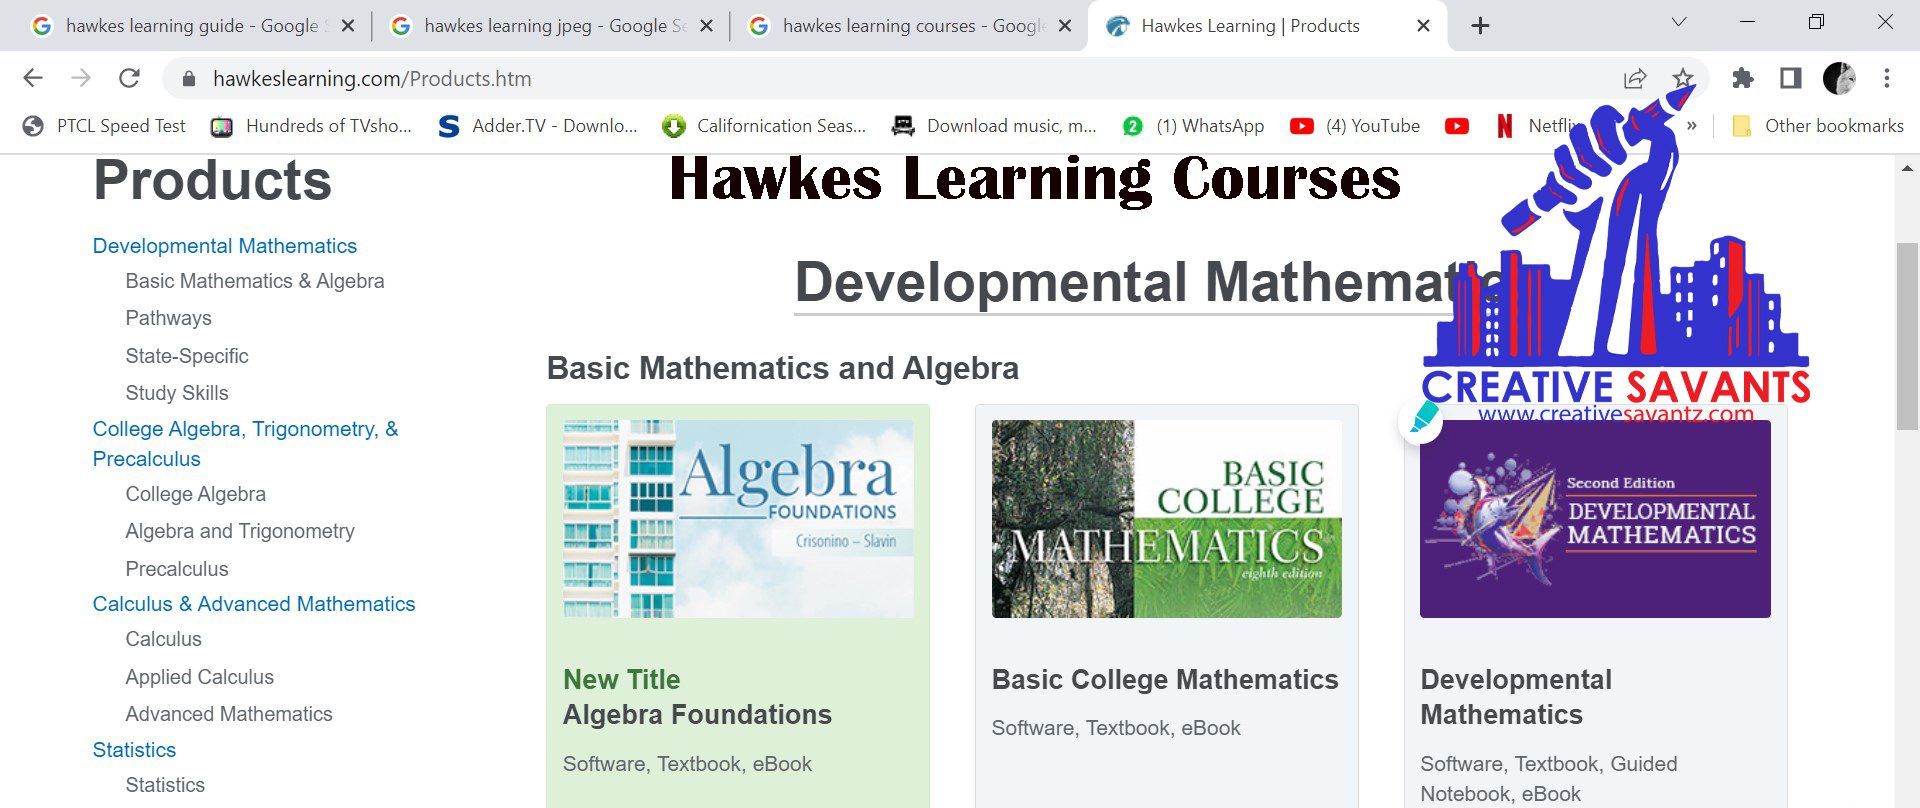 Hawkes Learning courses